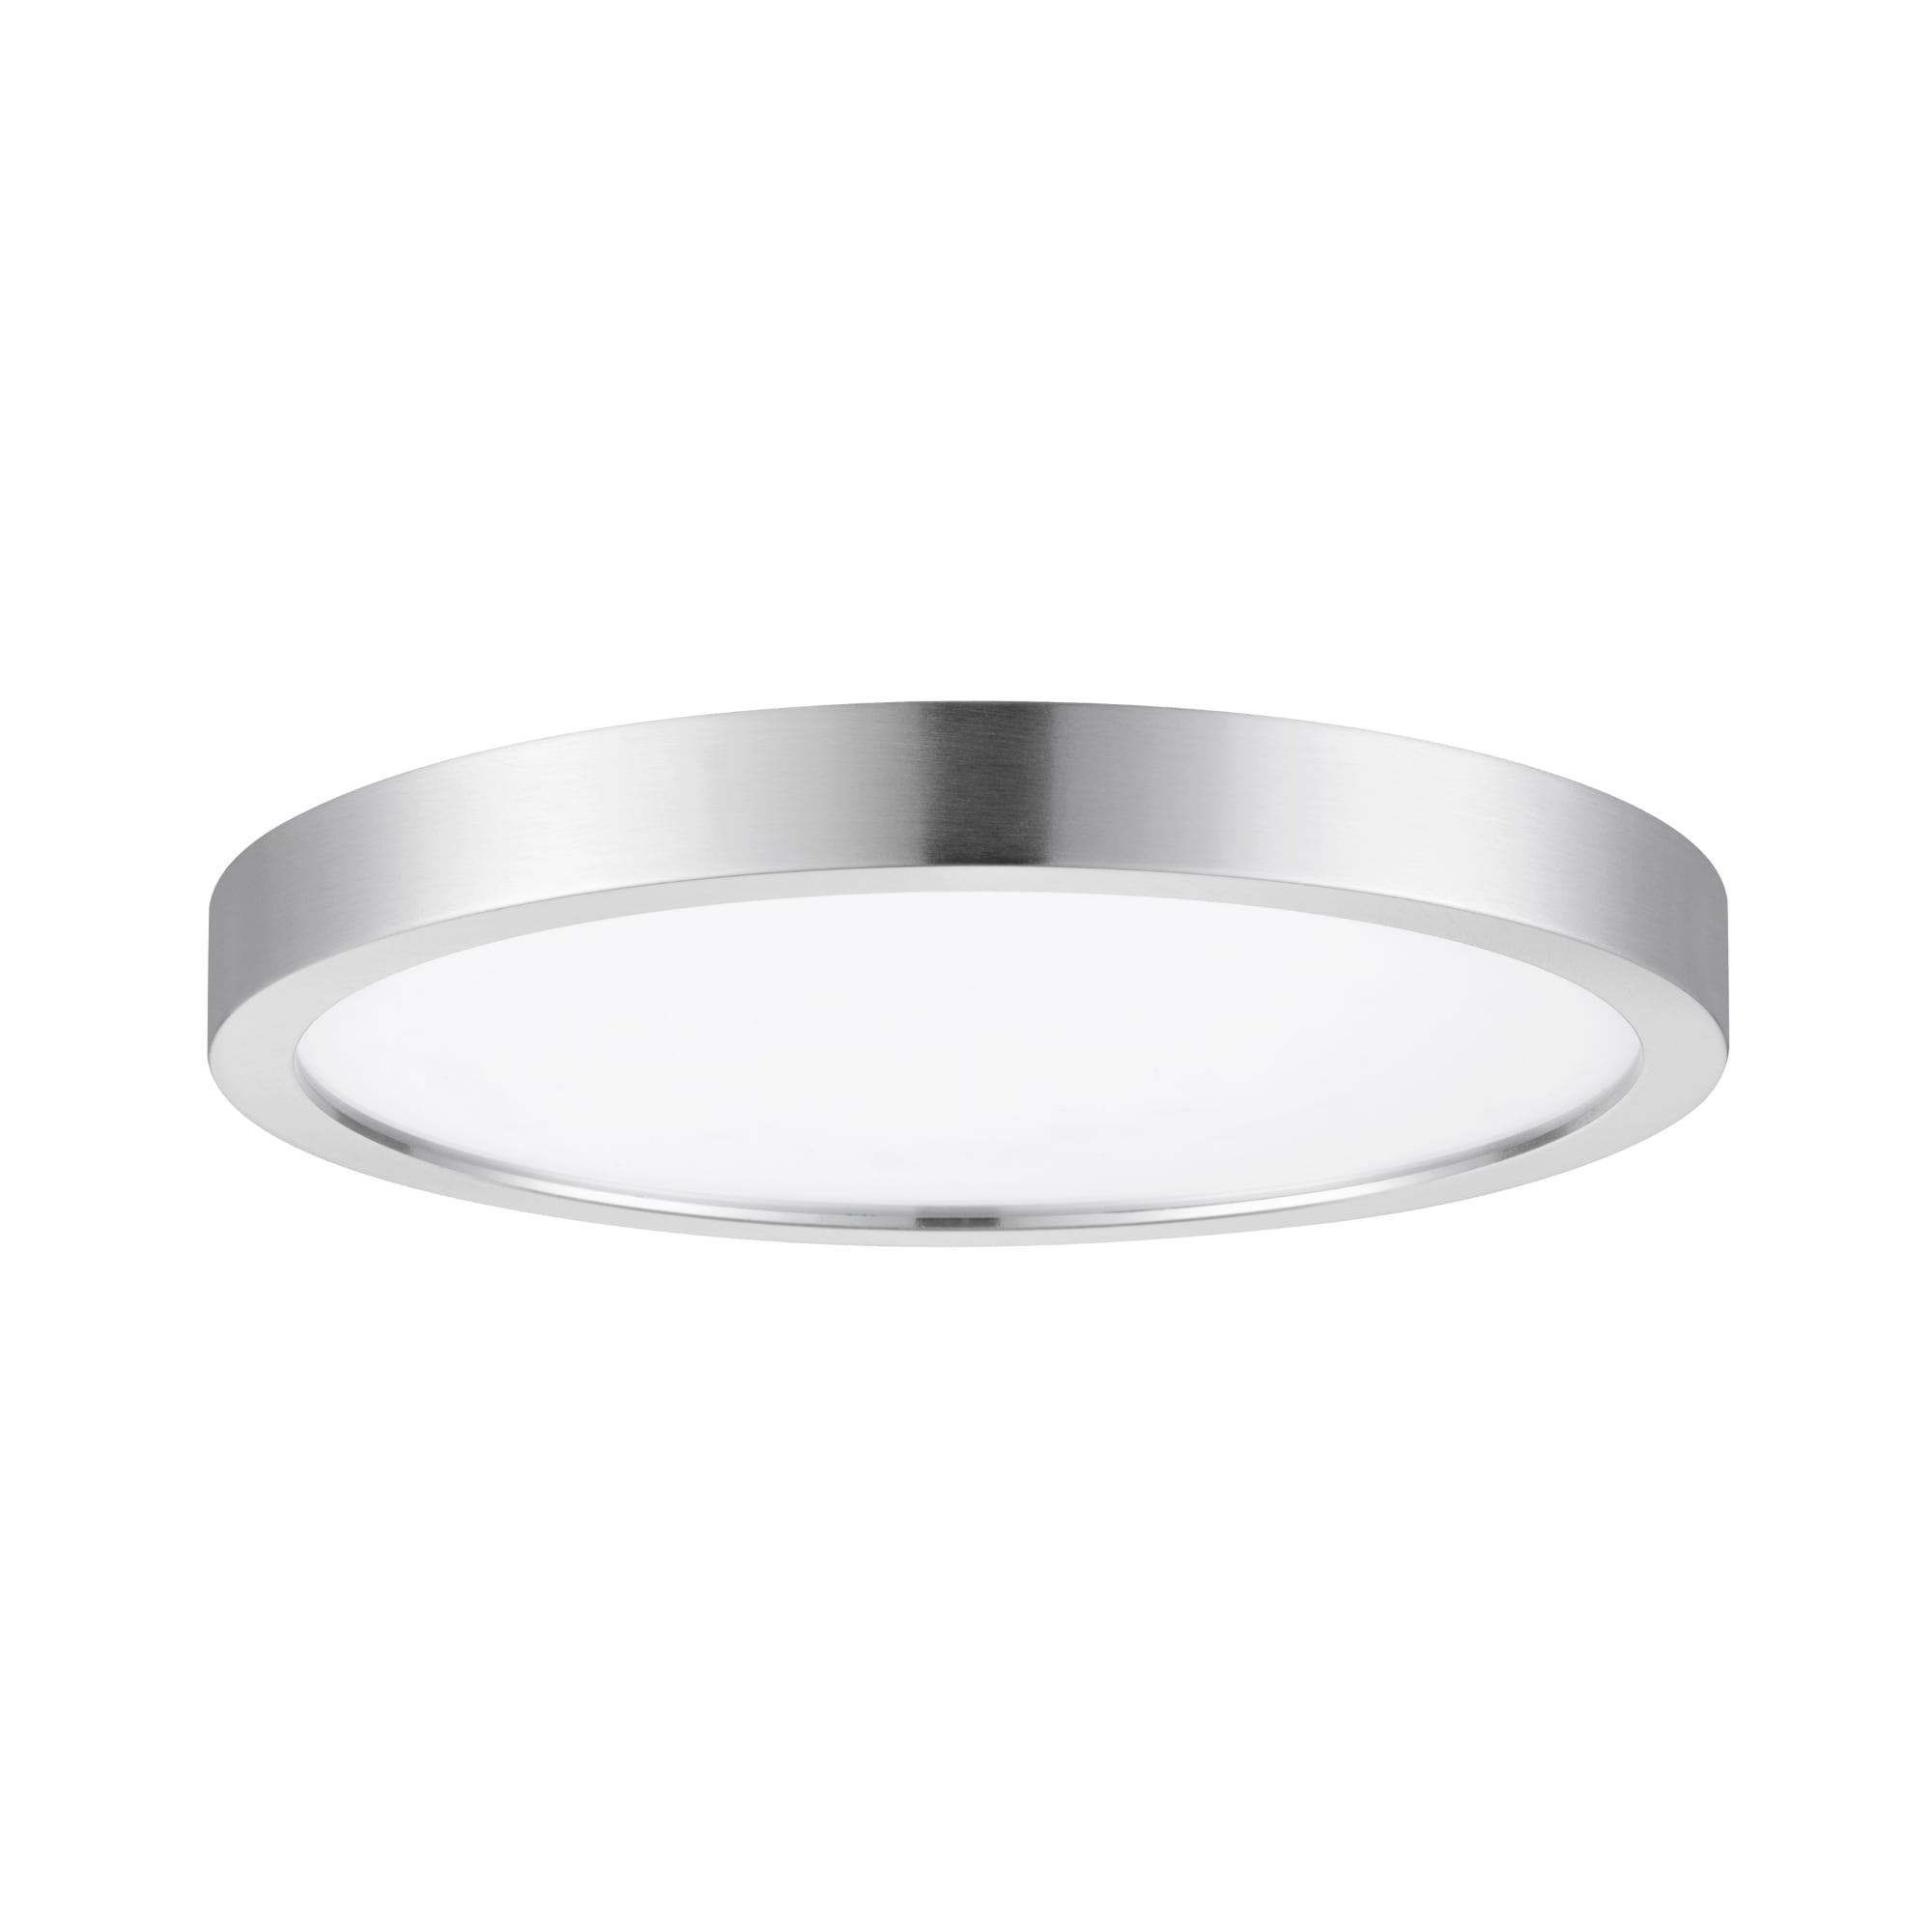 Project Mount STAR LED Lighting in Brushed (2-Pack) the ENERGY Source at Flush Flush 12-in 1-Light Nickel Mount Light department